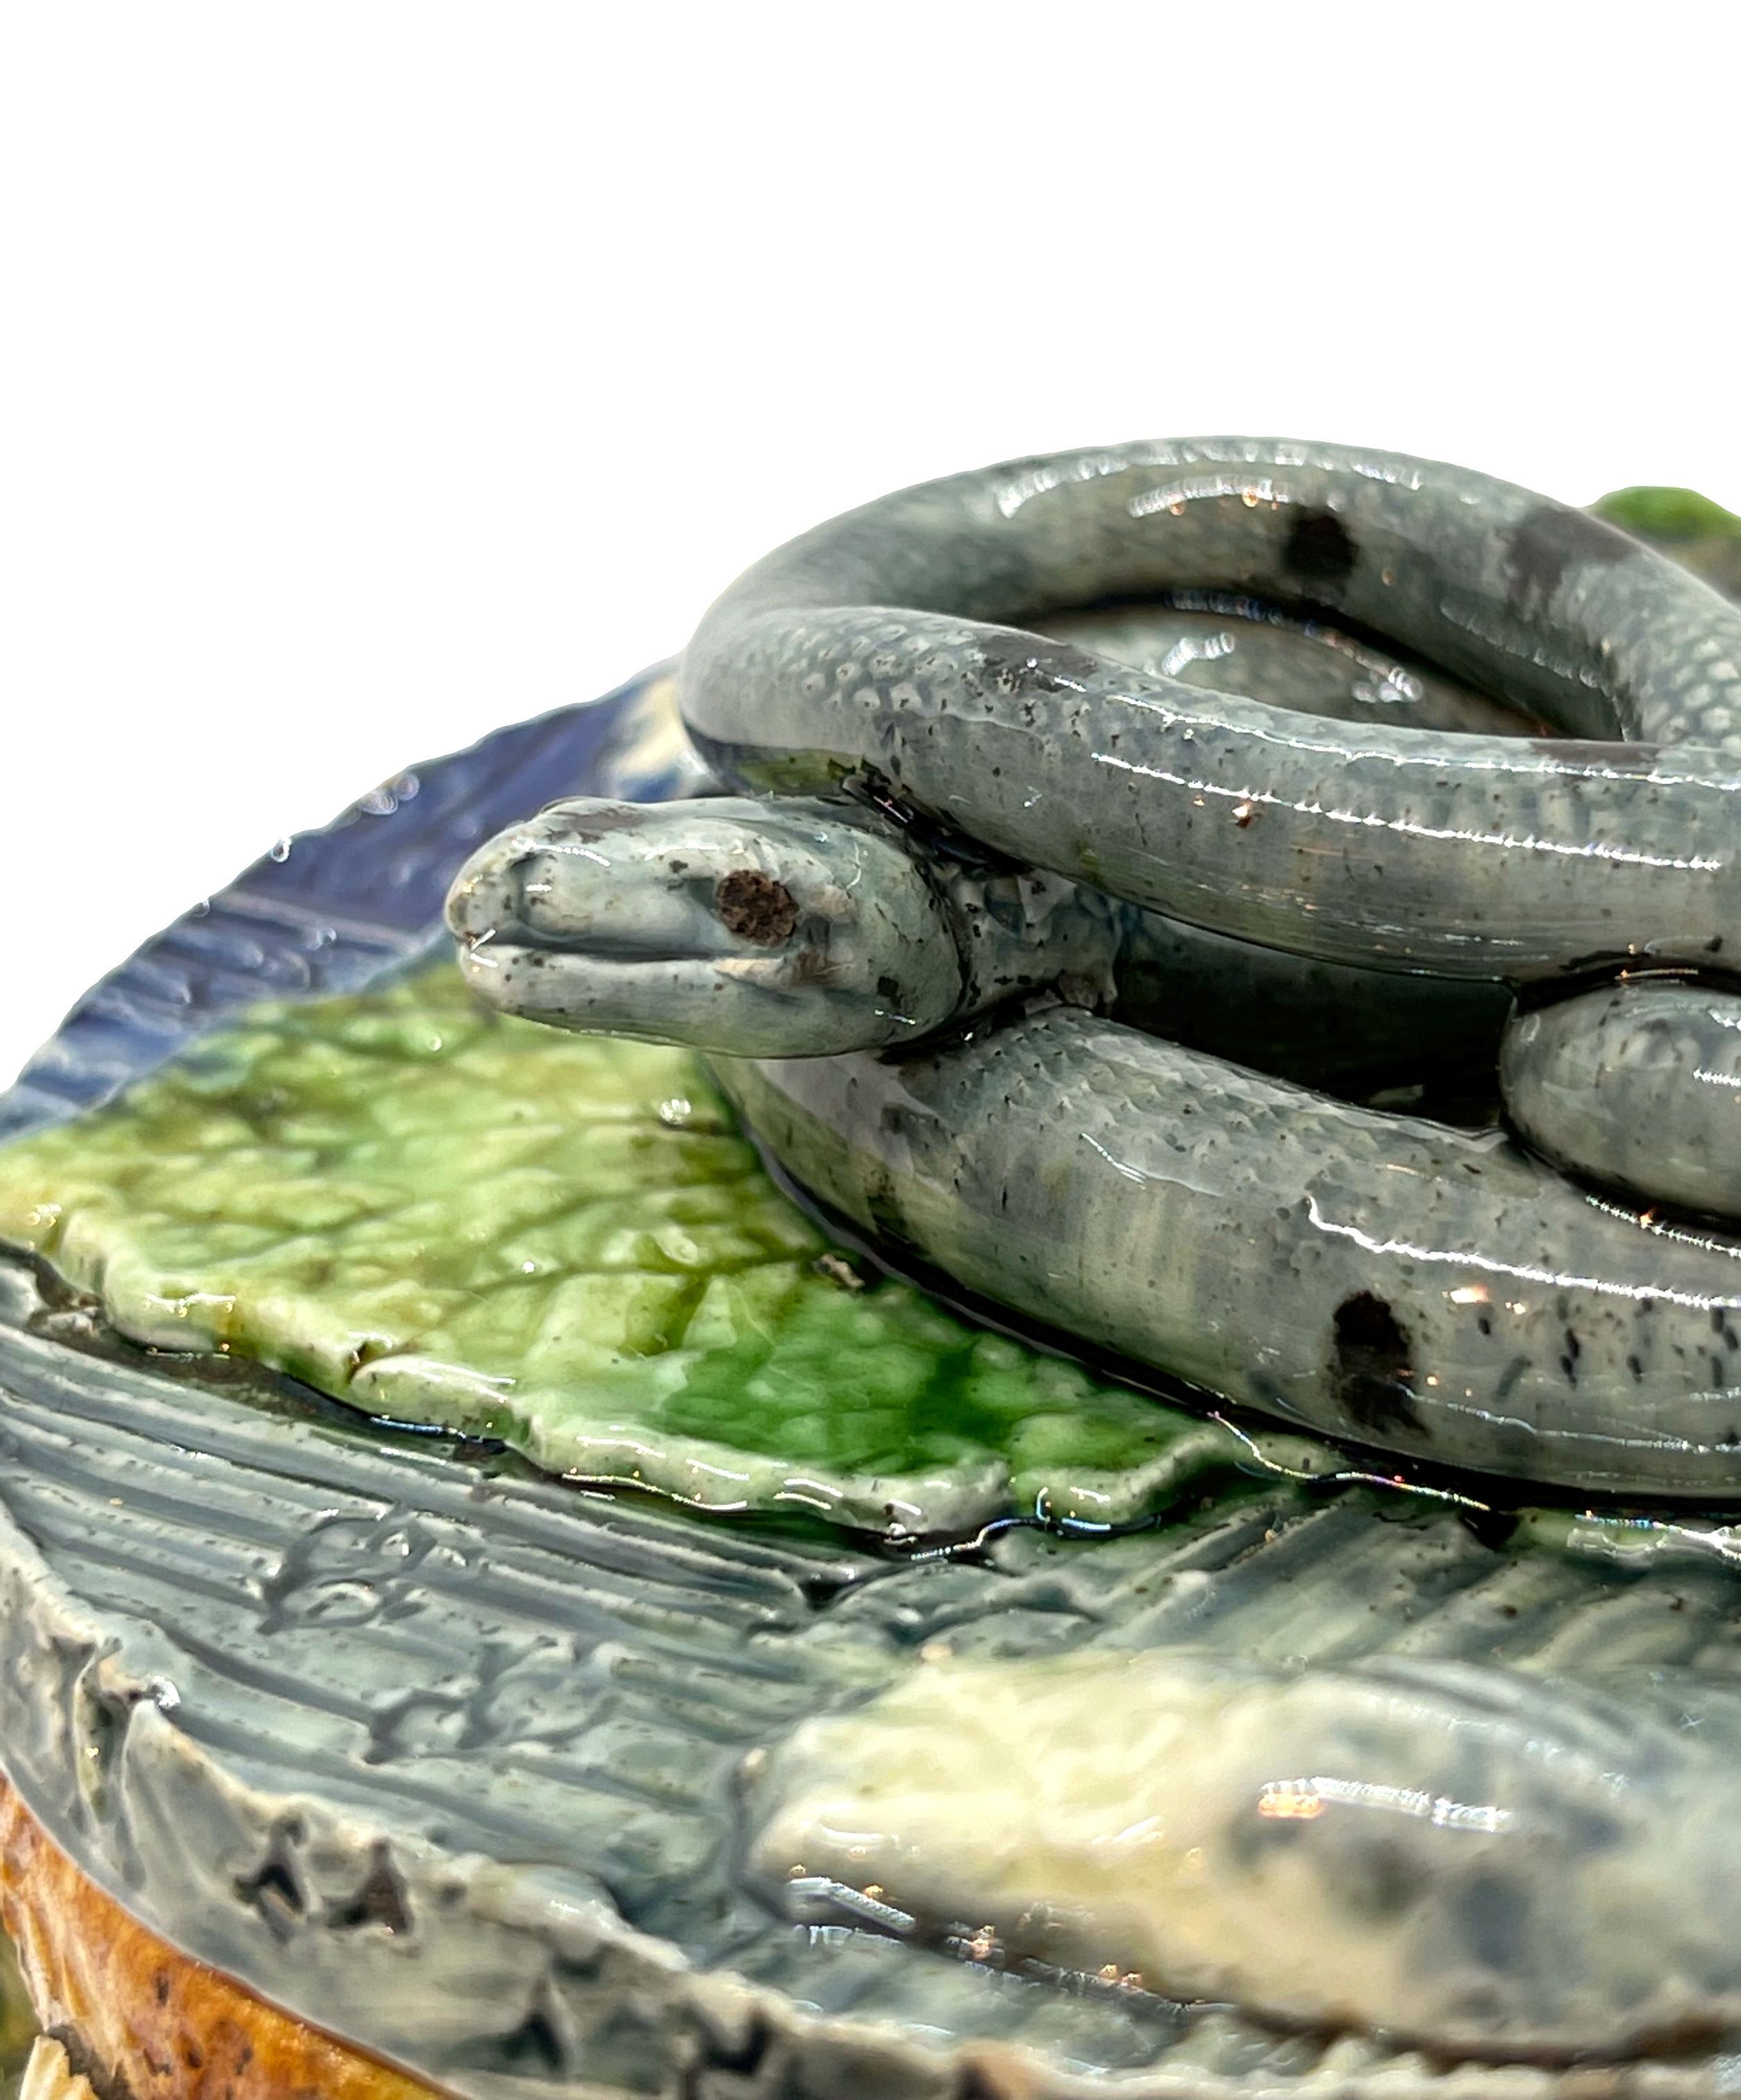 19th Century Thomas Sergent Majolica Palissy Ware Humidor with Coiled Snake on Lid, ca, 1880 